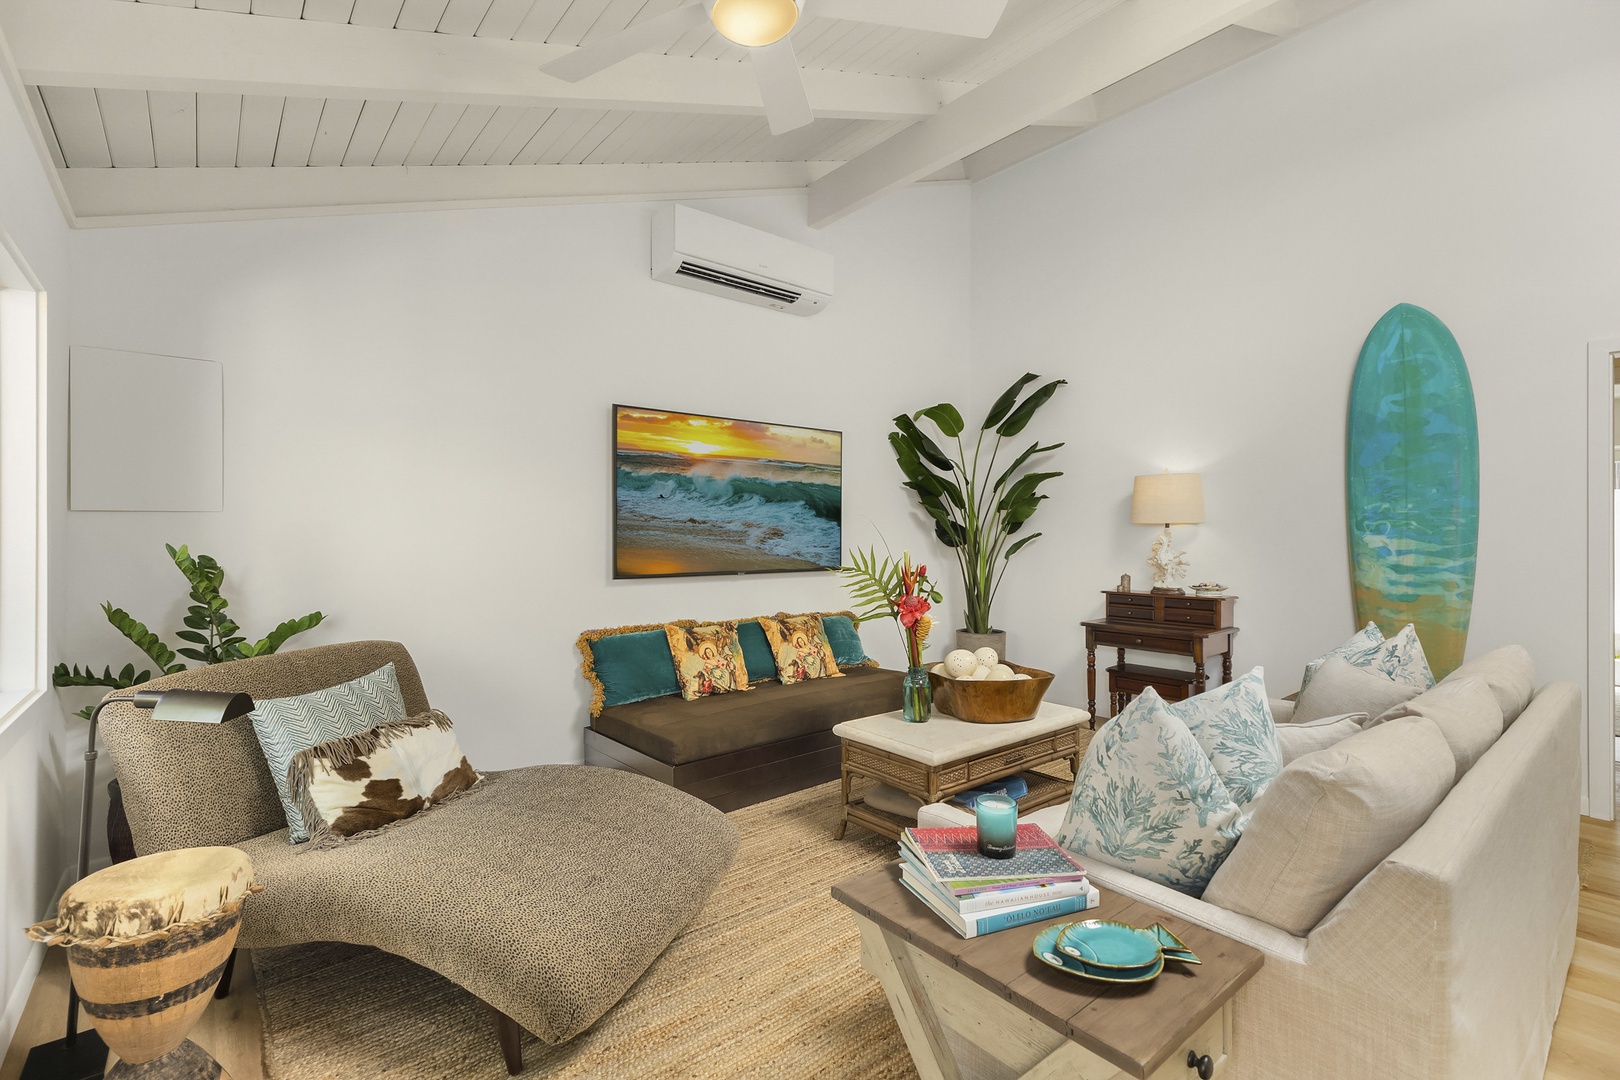 Kailua Vacation Rentals, Ranch Beach House - Living room features, stylish furnishings, Split A/C and large flatscreen TV